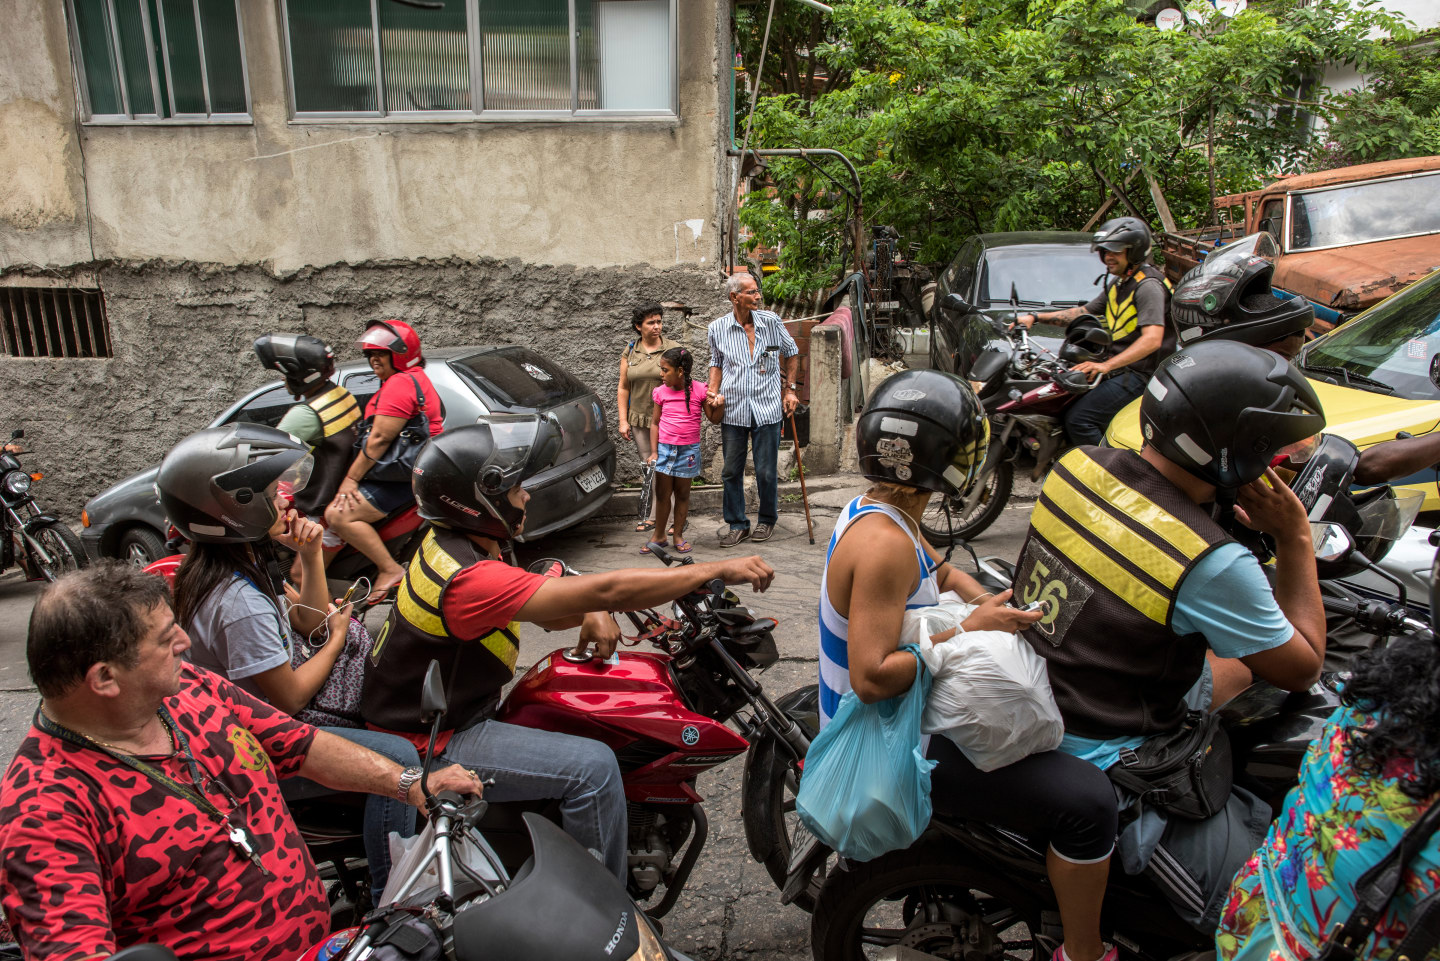 These Poignant Photographs Document Real Life In Rio De Janeiro